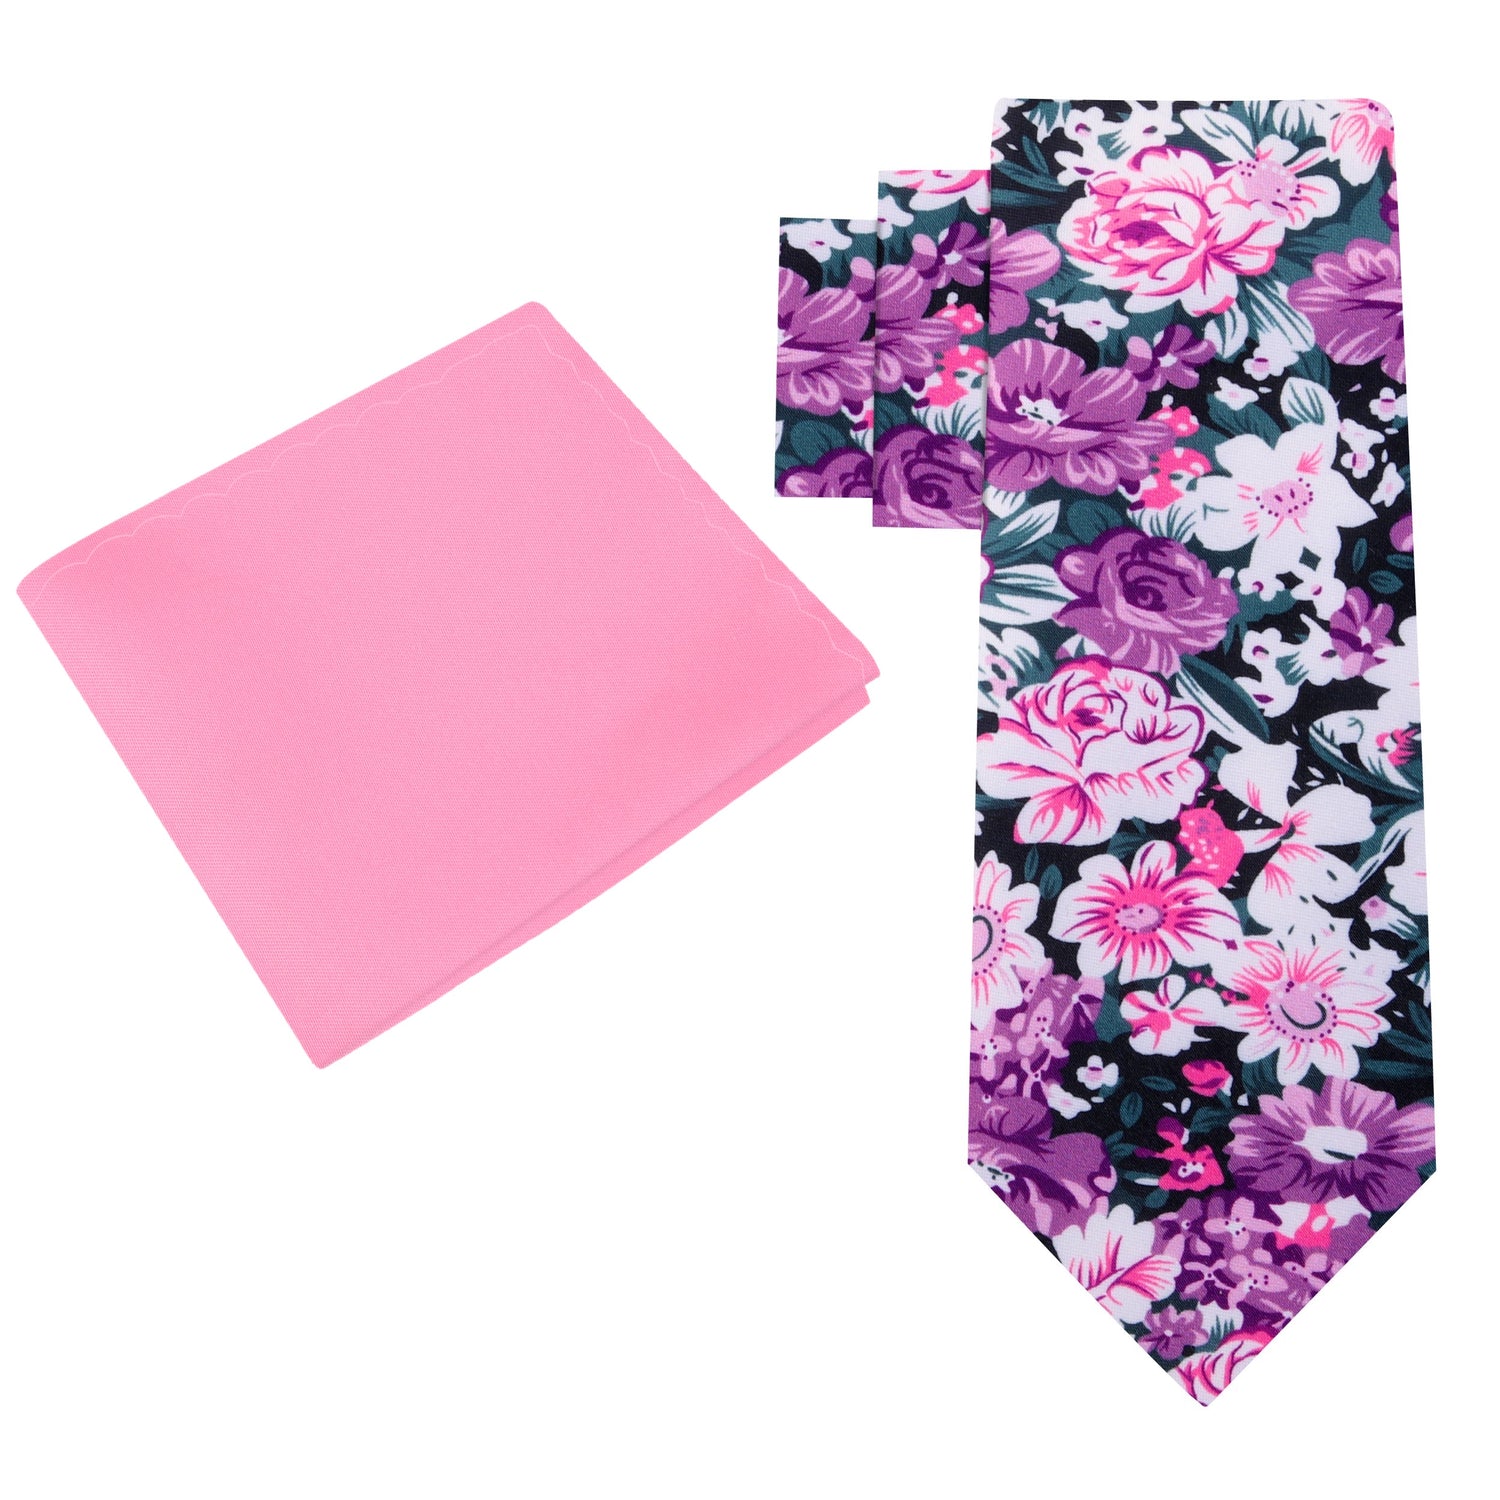 Alt view: Pink, Purple, White Sketched Flowers Necktie and Pink Square